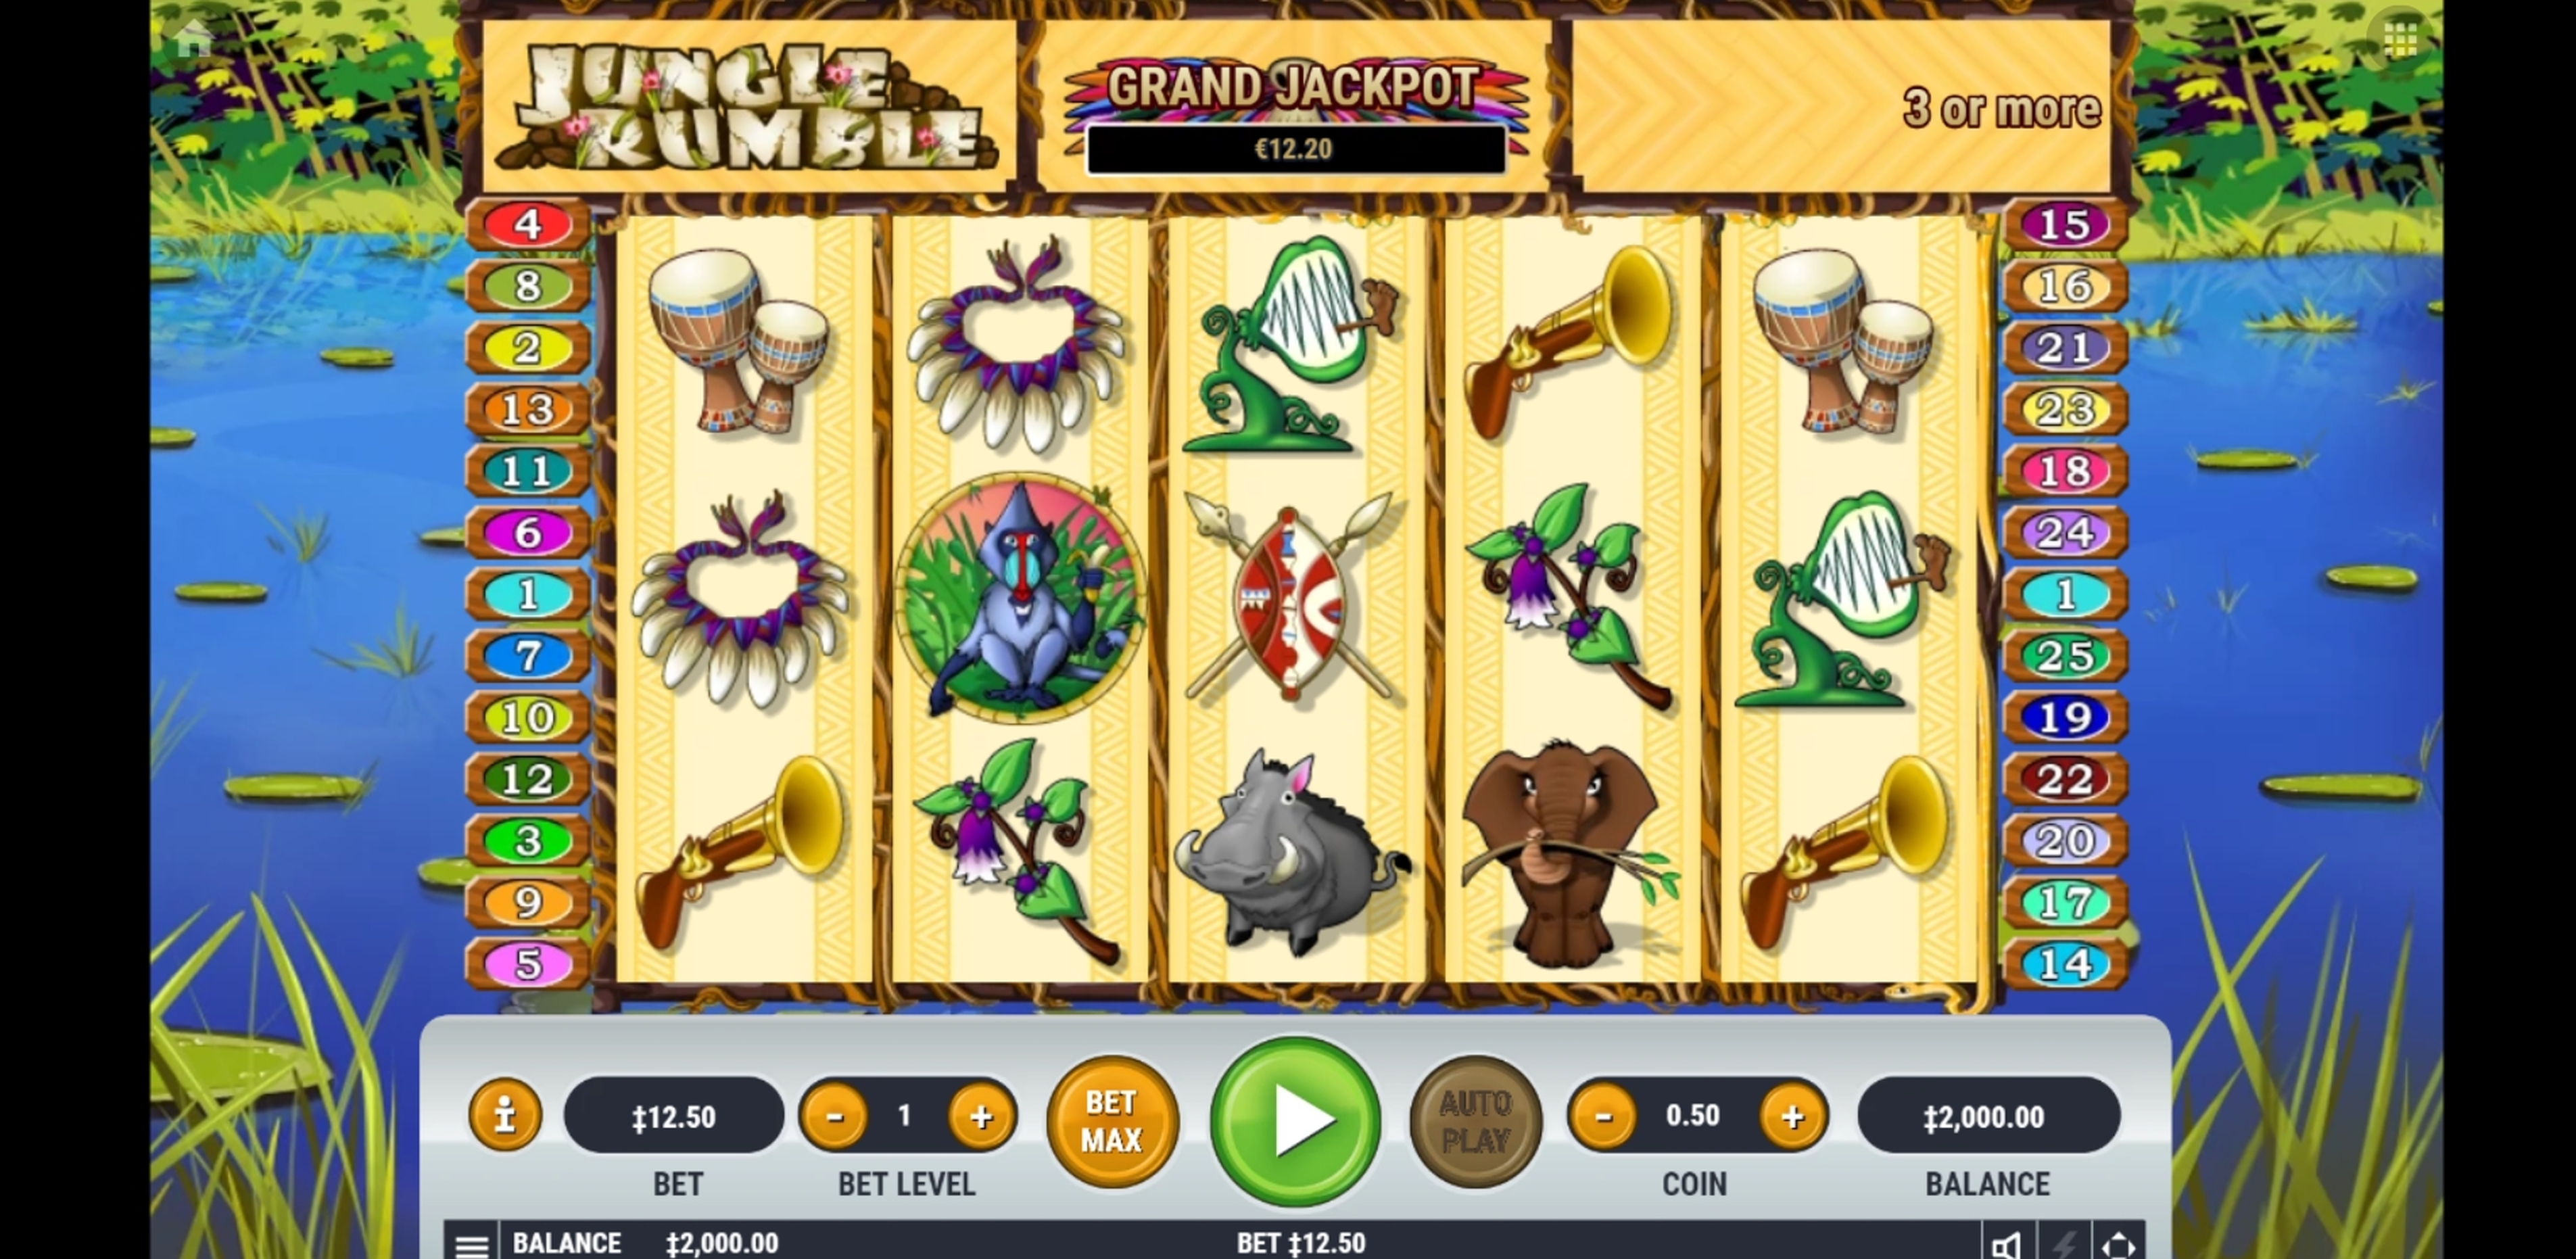 Reels in Jungle Rumble Slot Game by Habanero